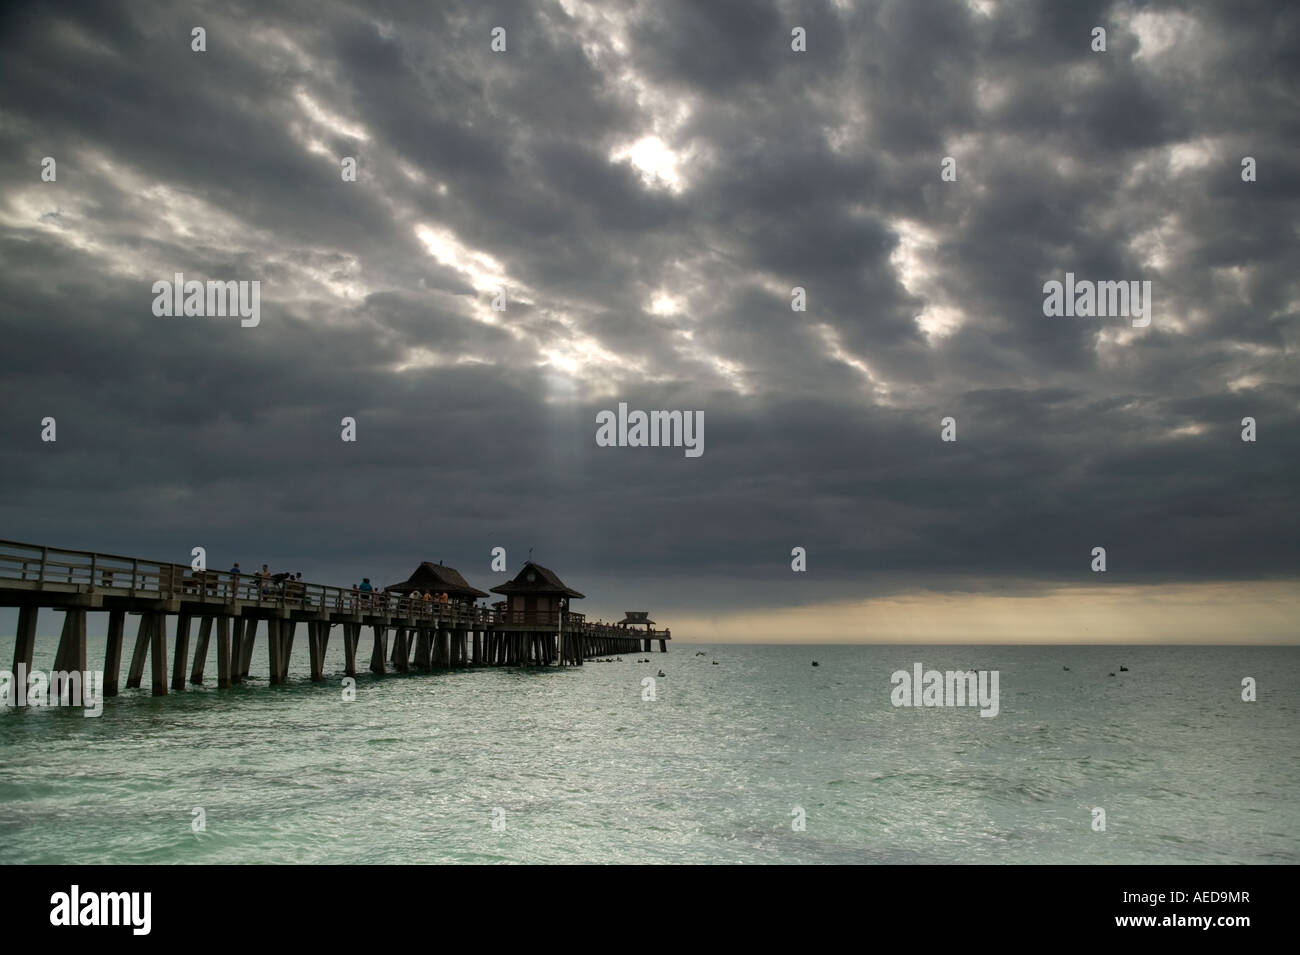 The old wooden pier at Naples beach with dramatic stormy sky and shafts of sunlight over the sea Stock Photo